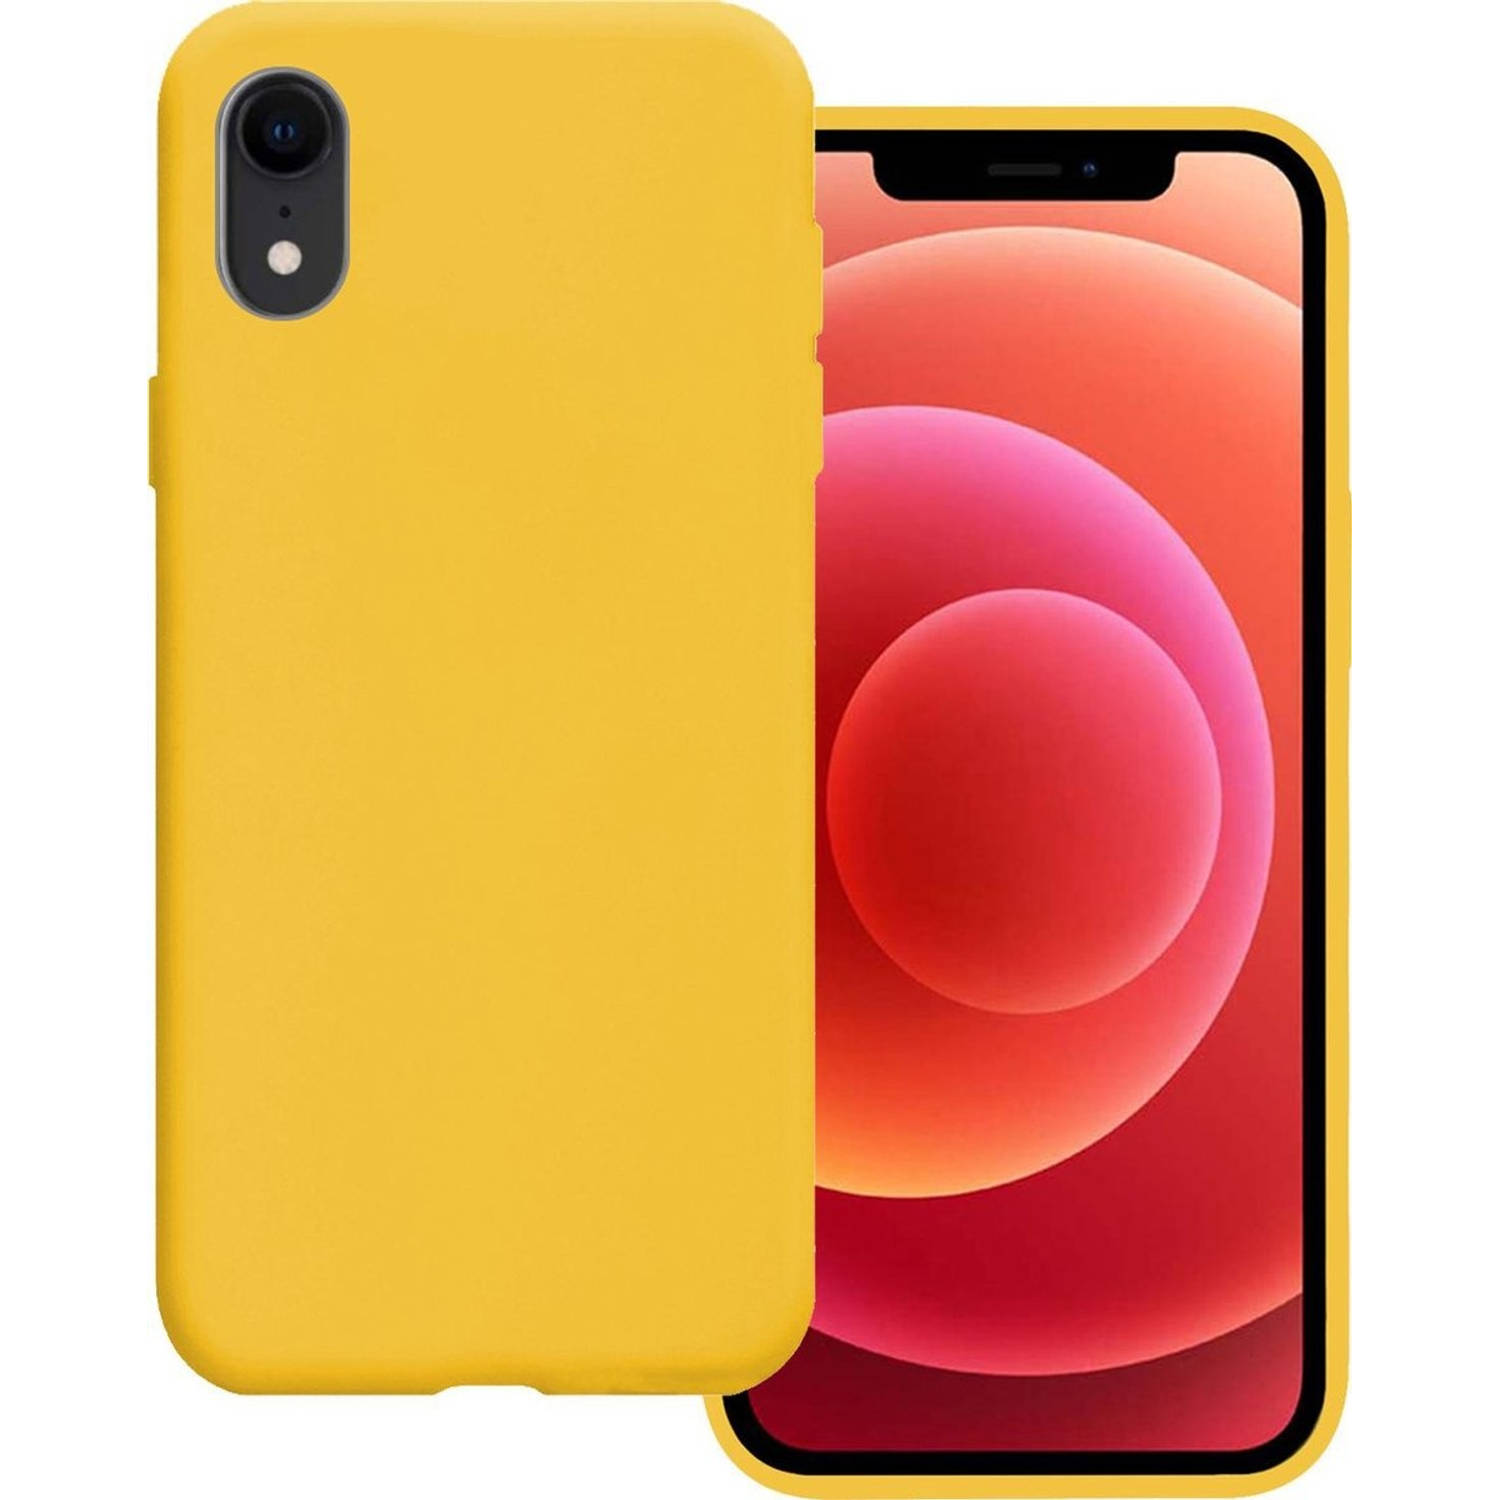 Basey iPhone XR Hoesje Siliconen Hoes Case Cover iPhone XR-Geel